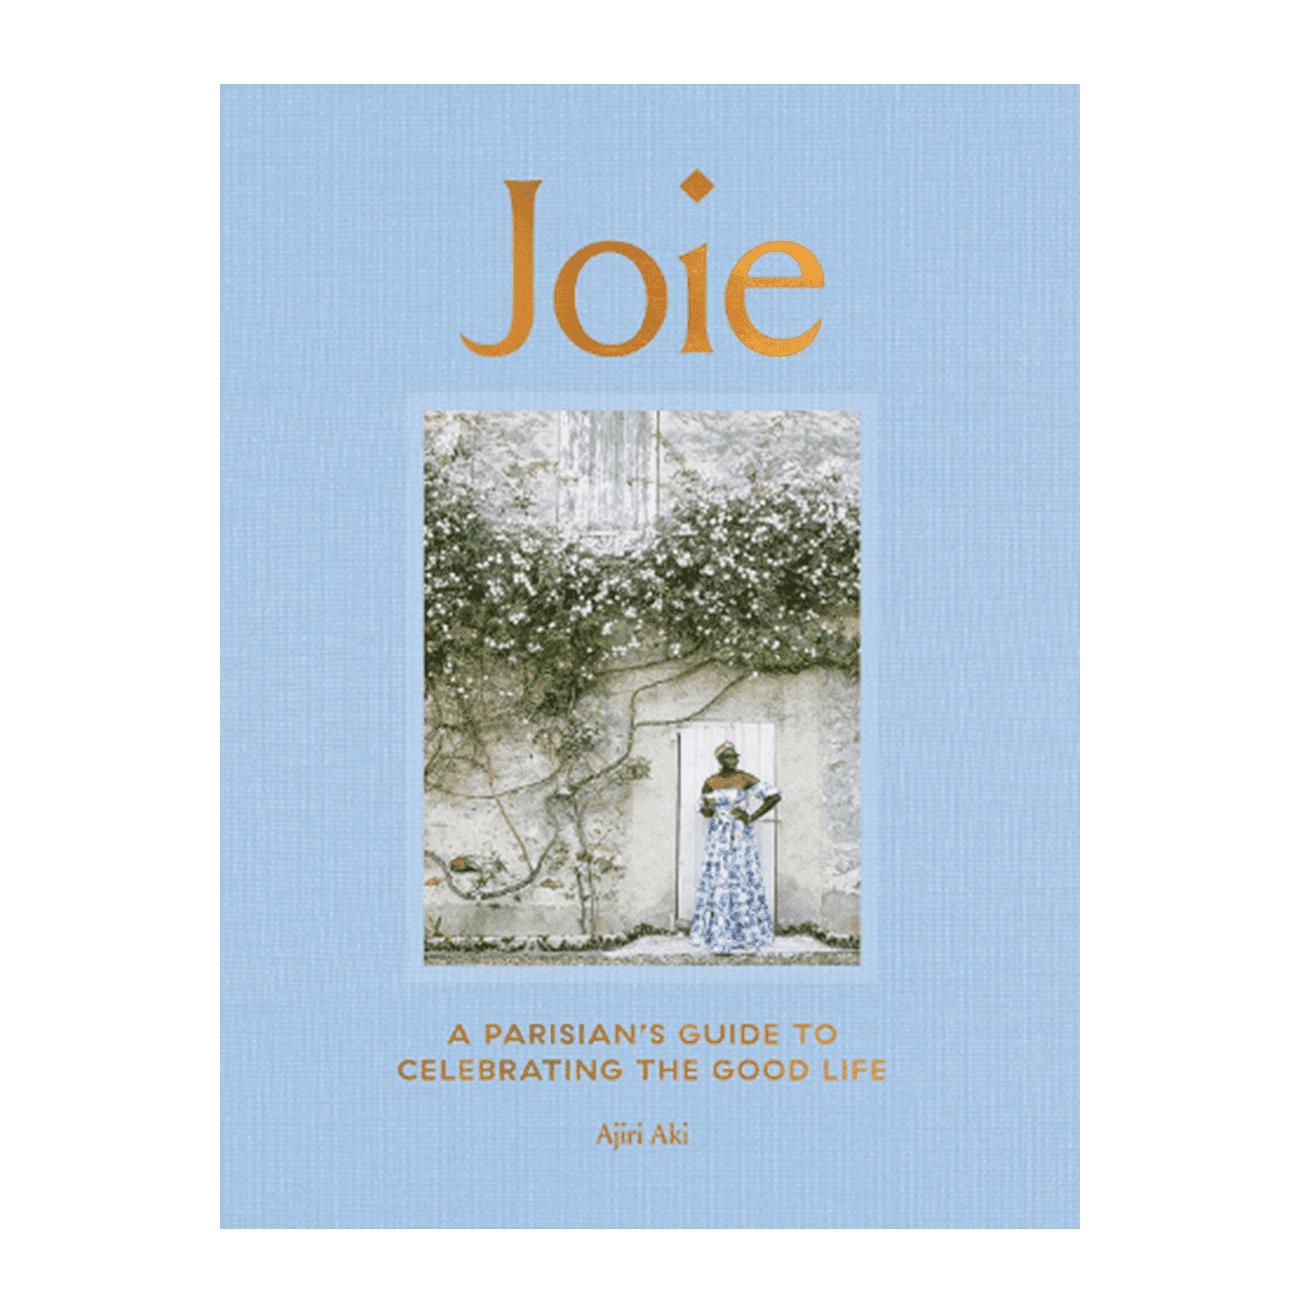 Joie: A Parisian's Guide to Celebrating the Good Life Books